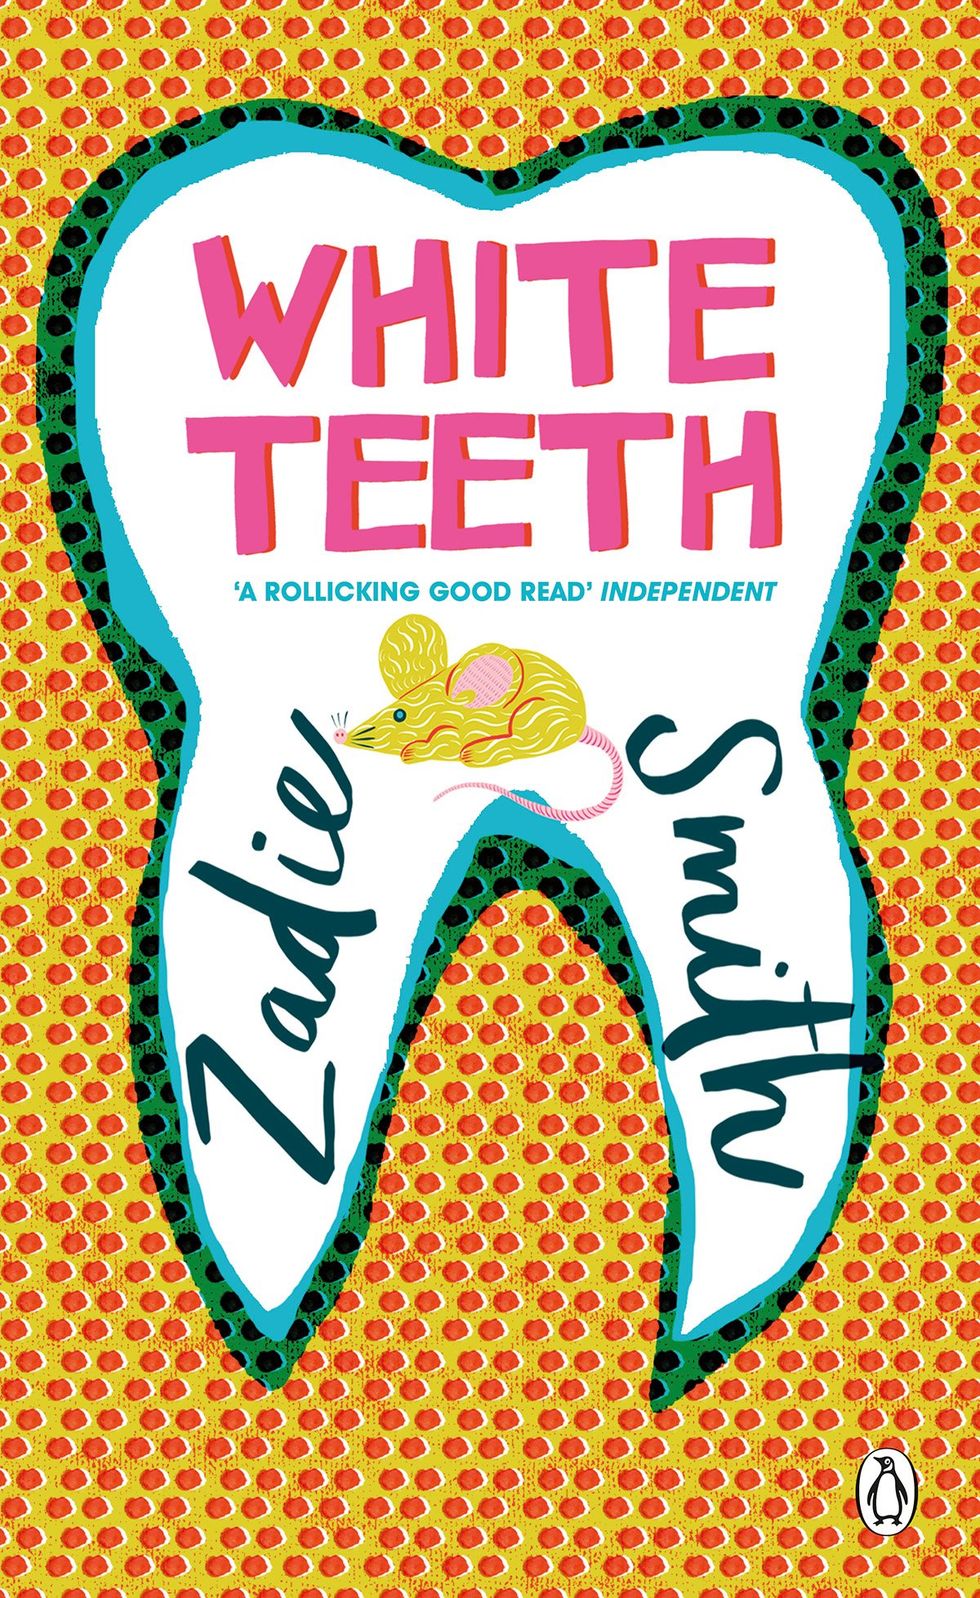 Out and About with Joel Kim Booster \u2013 JKB would bring 'White Teeth' by Zadie Smith if stranded on a deserted island